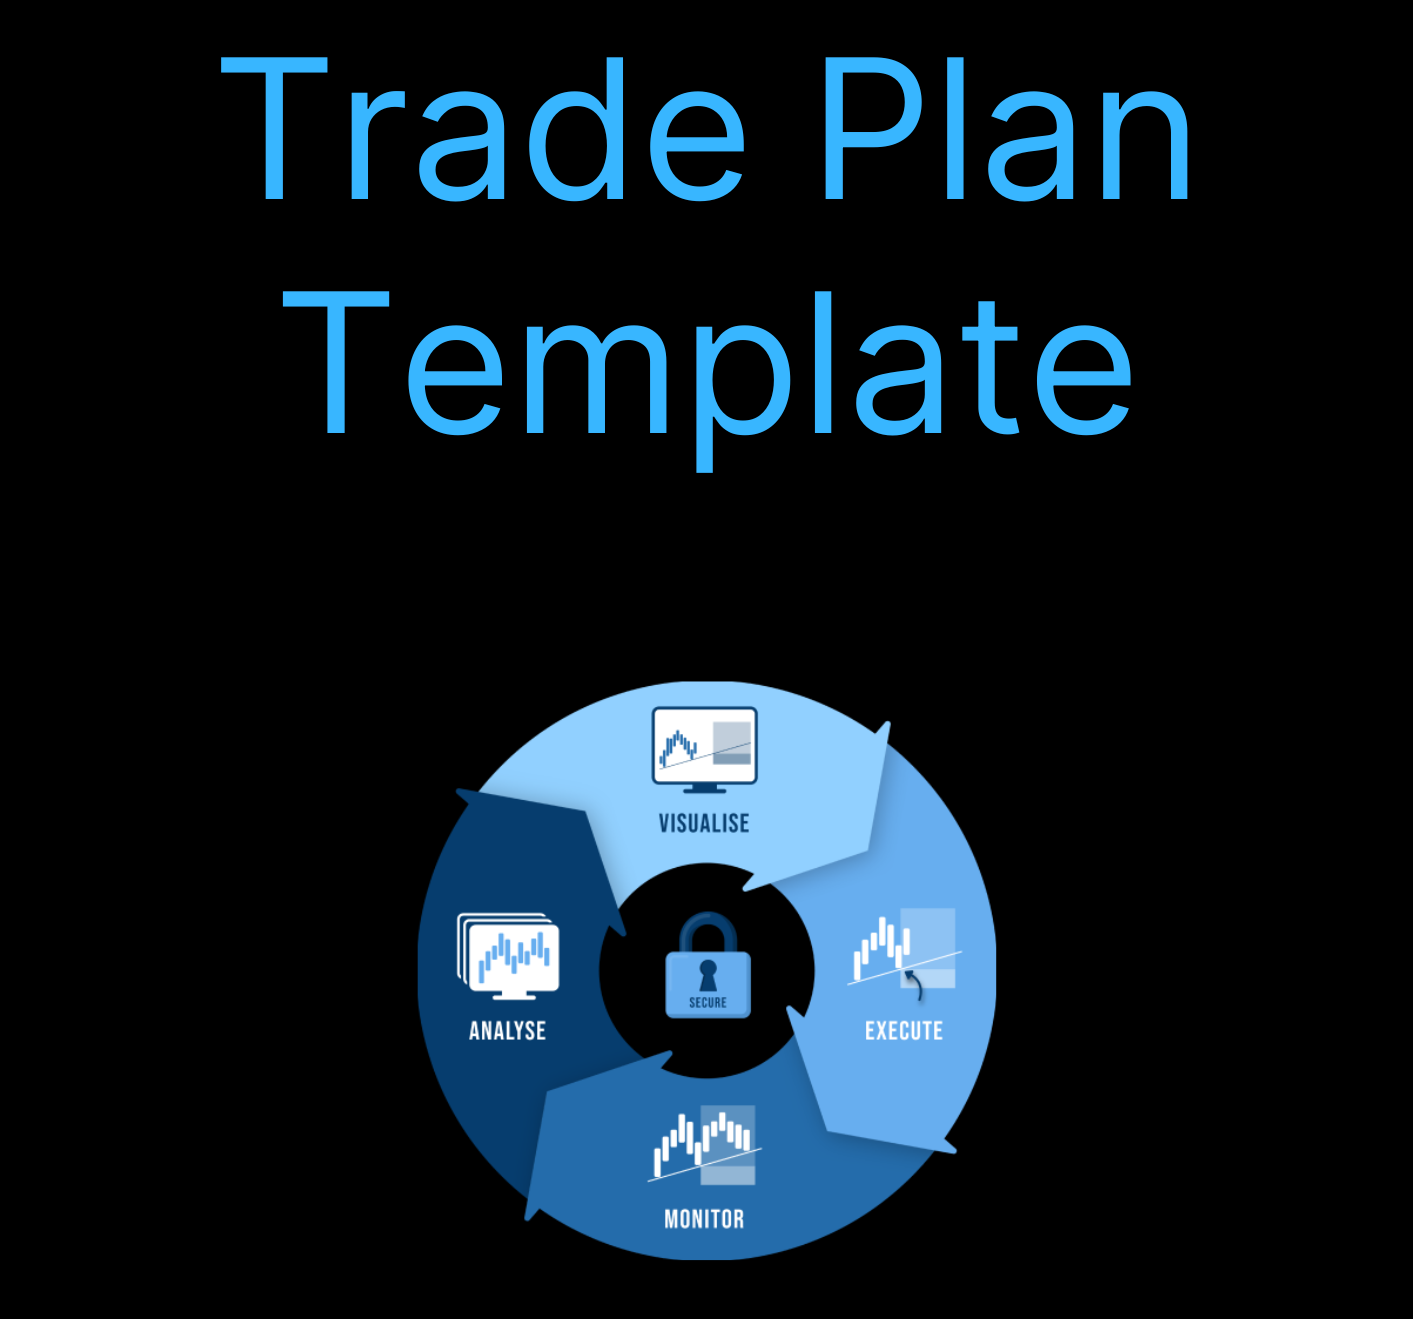 Trade plan template for automated forex trading